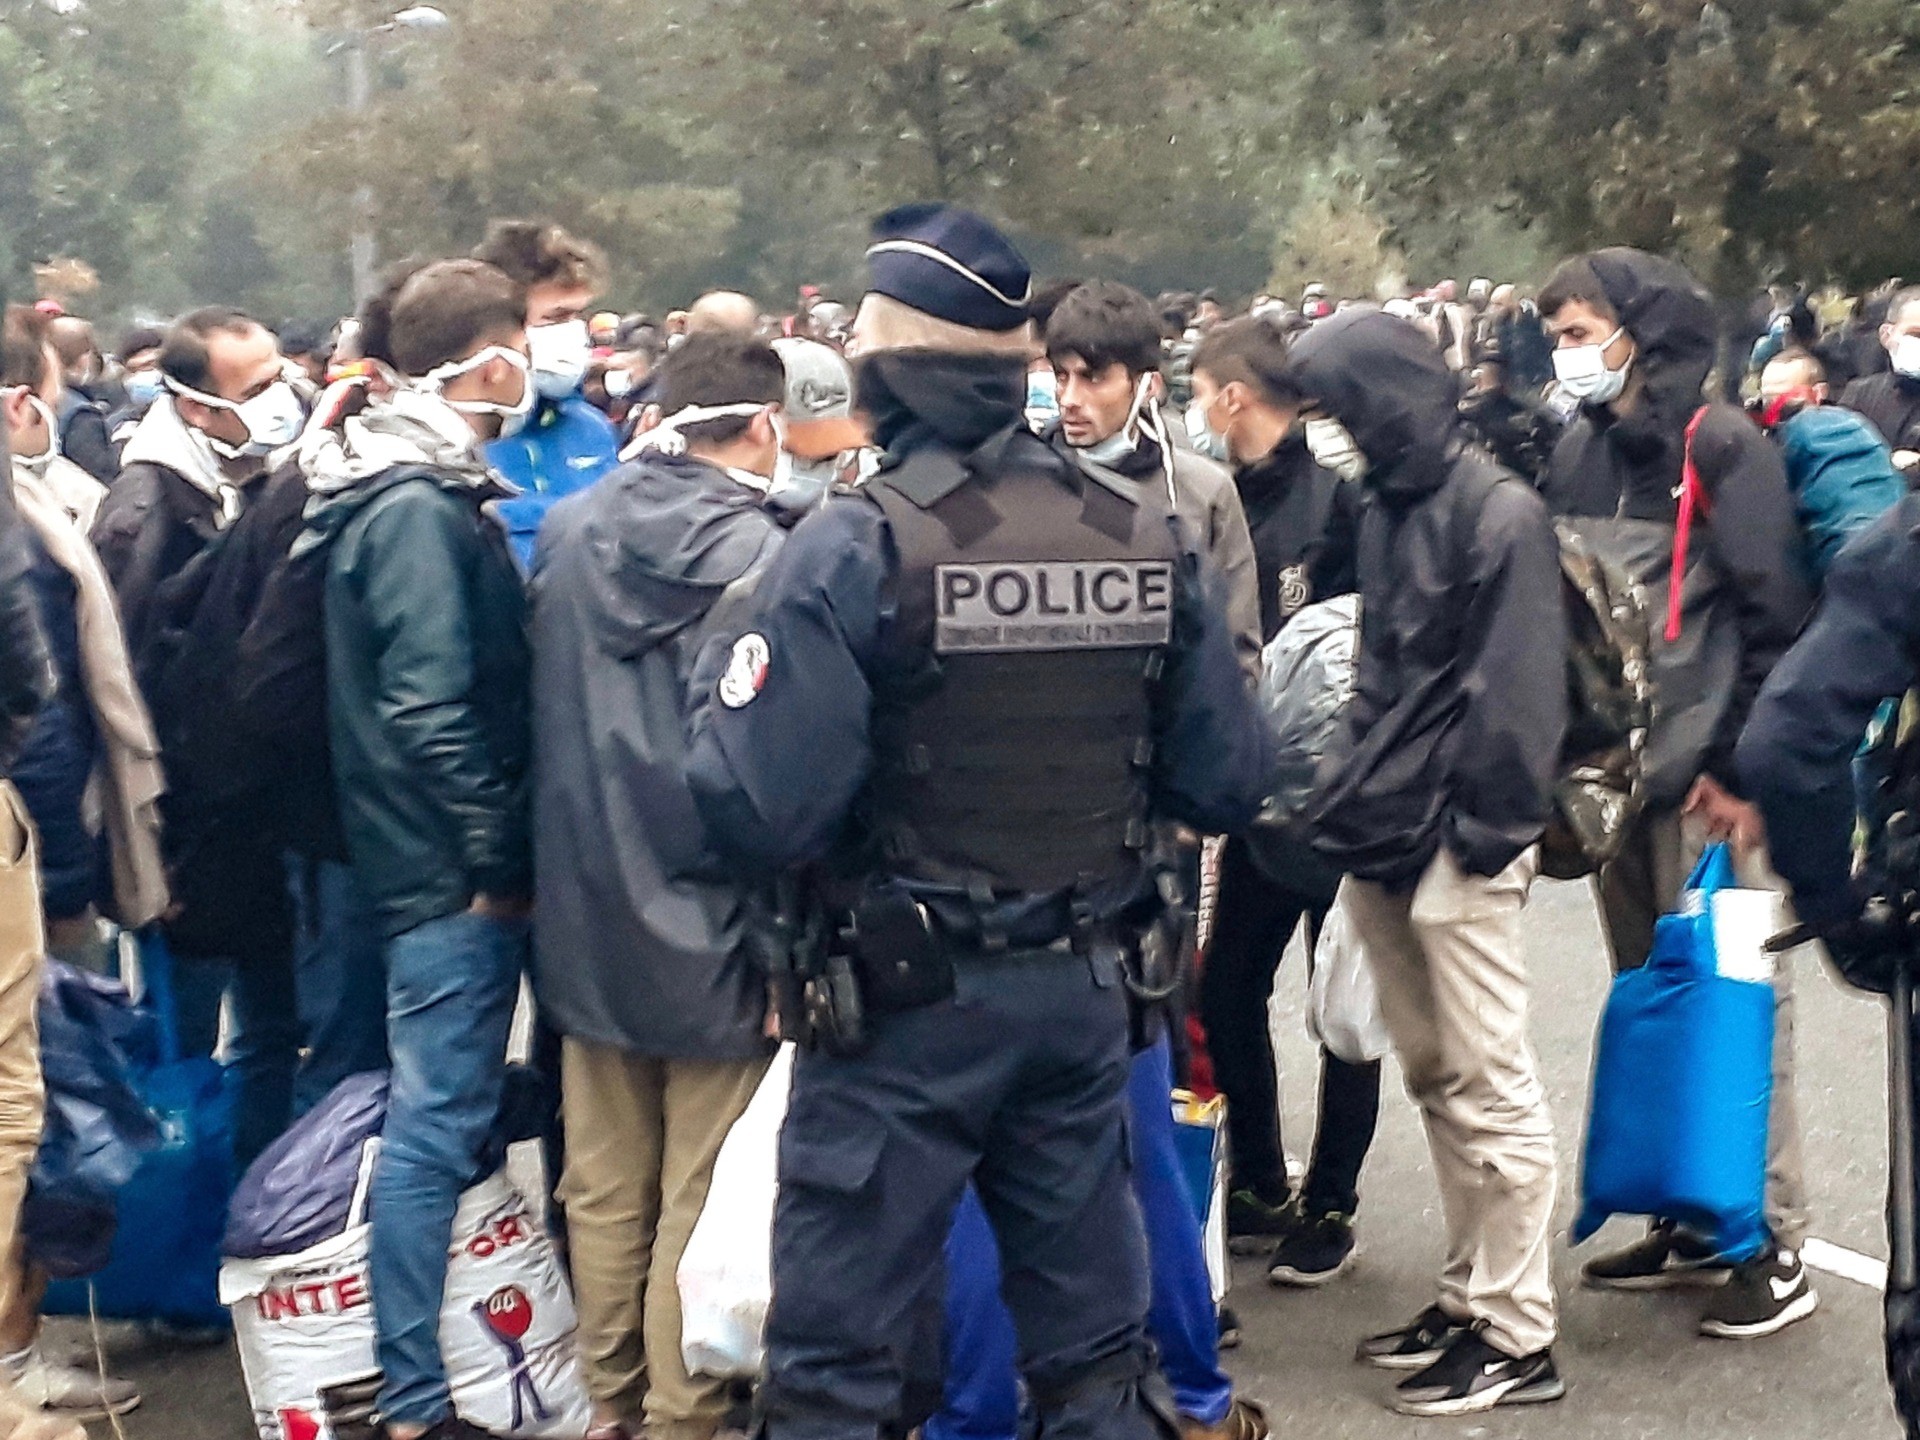 French police evacuate some 800 migrants after they dismantled their camp located near the hospital in Calais, northern France, on September 29, 2020. (Photo by Bernard BARRON / AFP) (Photo by BERNARD BARRON/AFP via Getty Images)